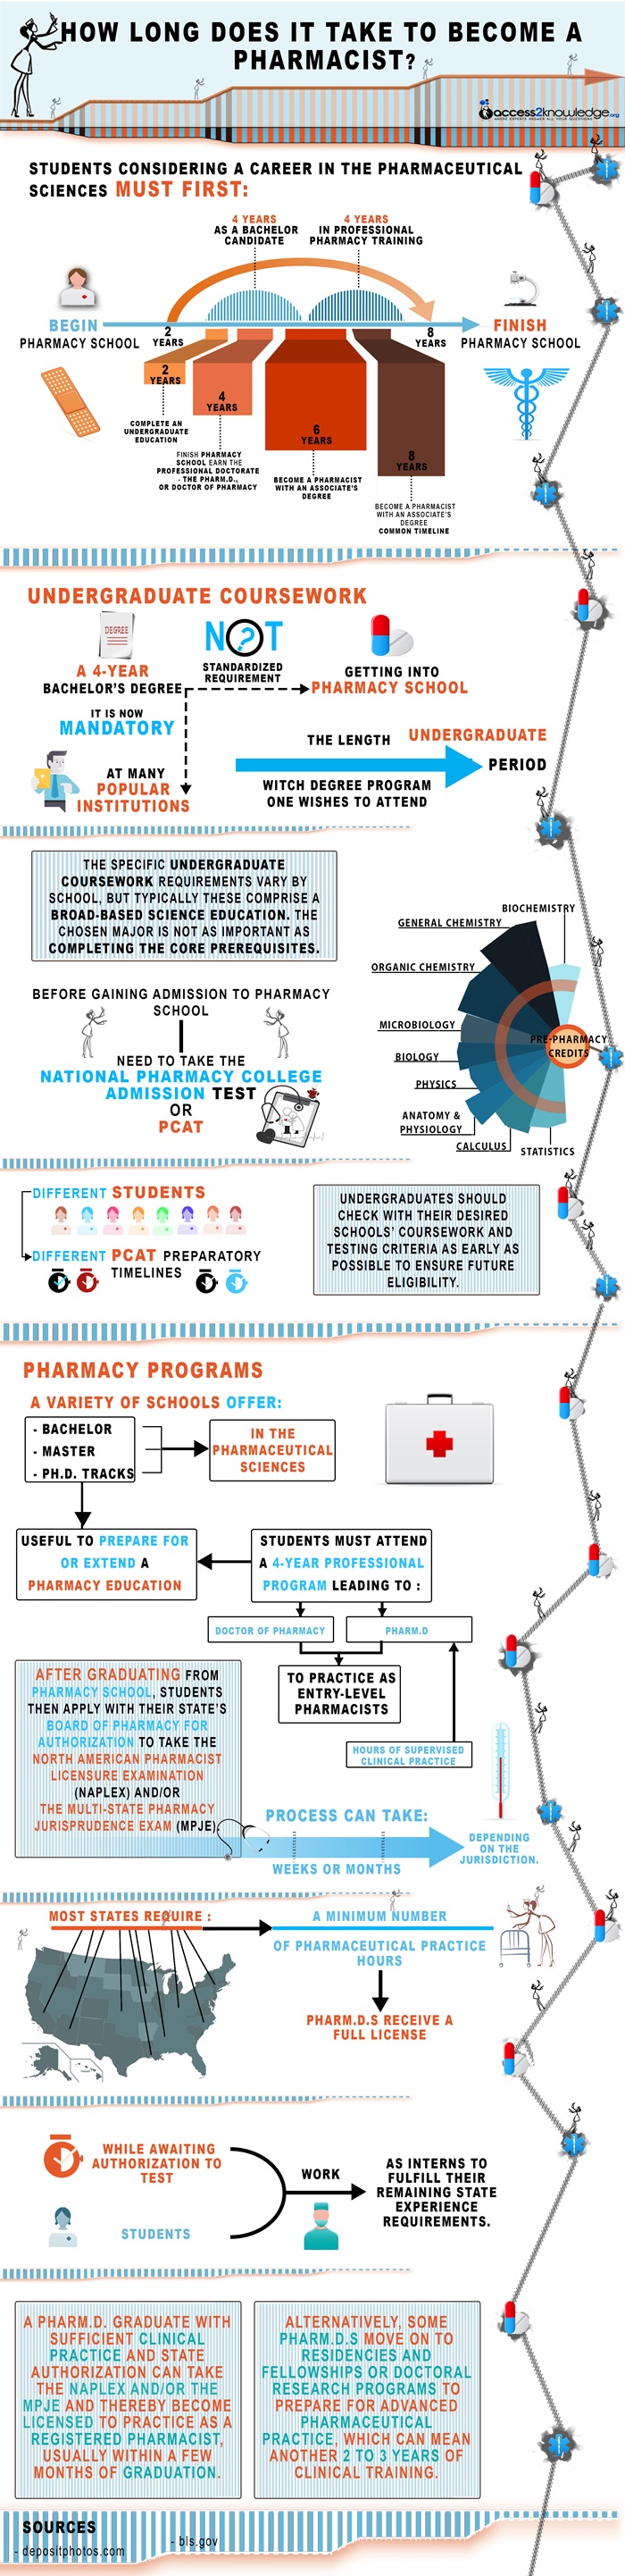 how long does it take to become a pharmacist? + infographic - access